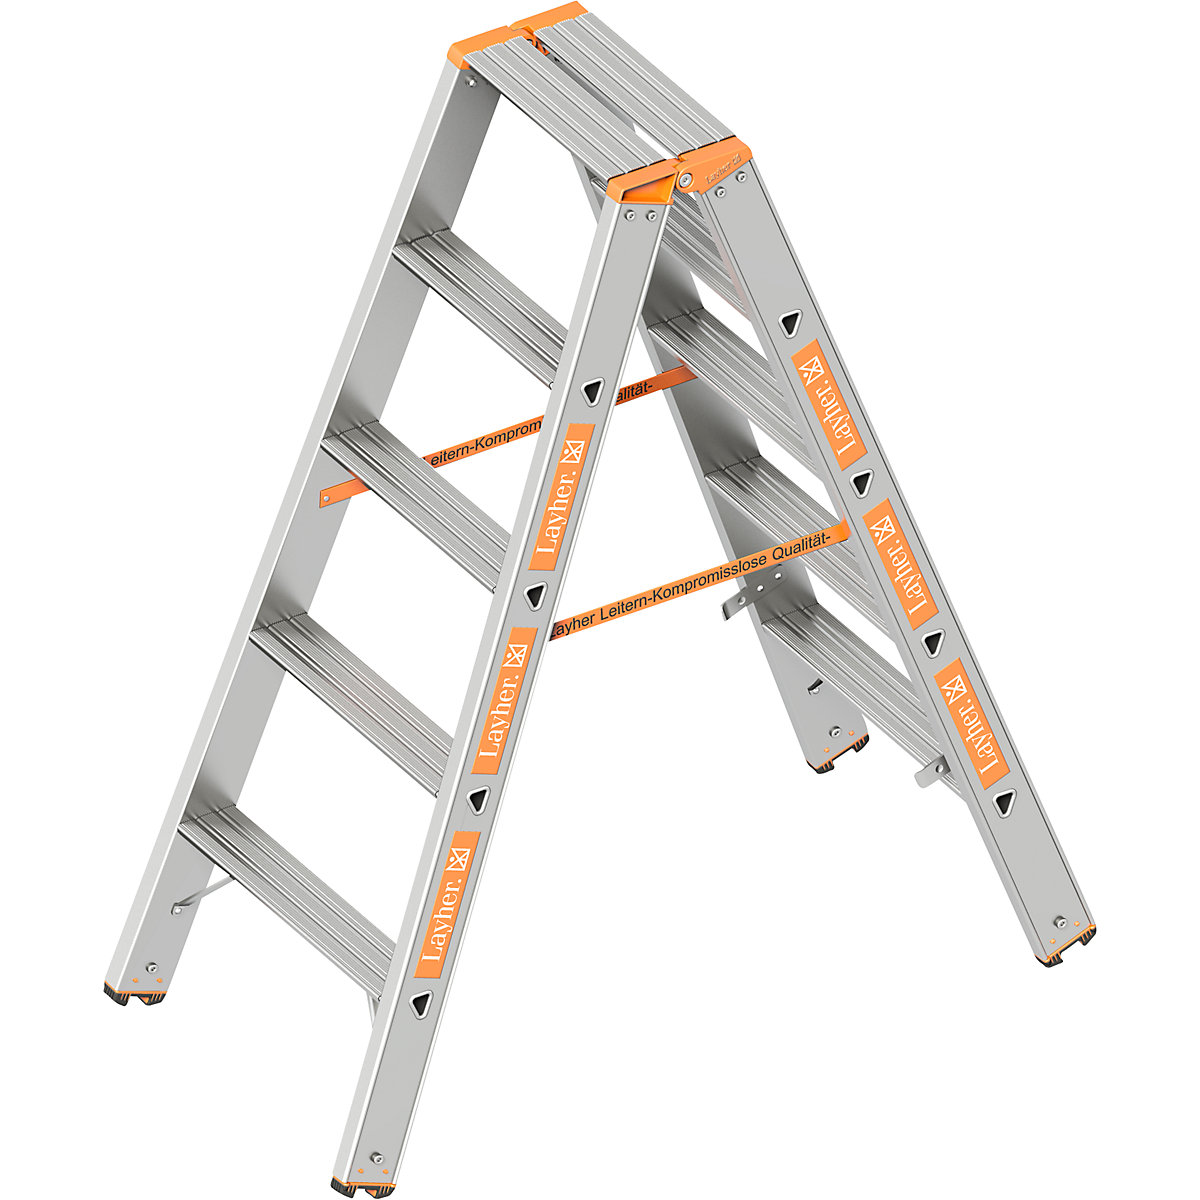 Step ladder – Layher, double sided access, 2 x 5 steps-1